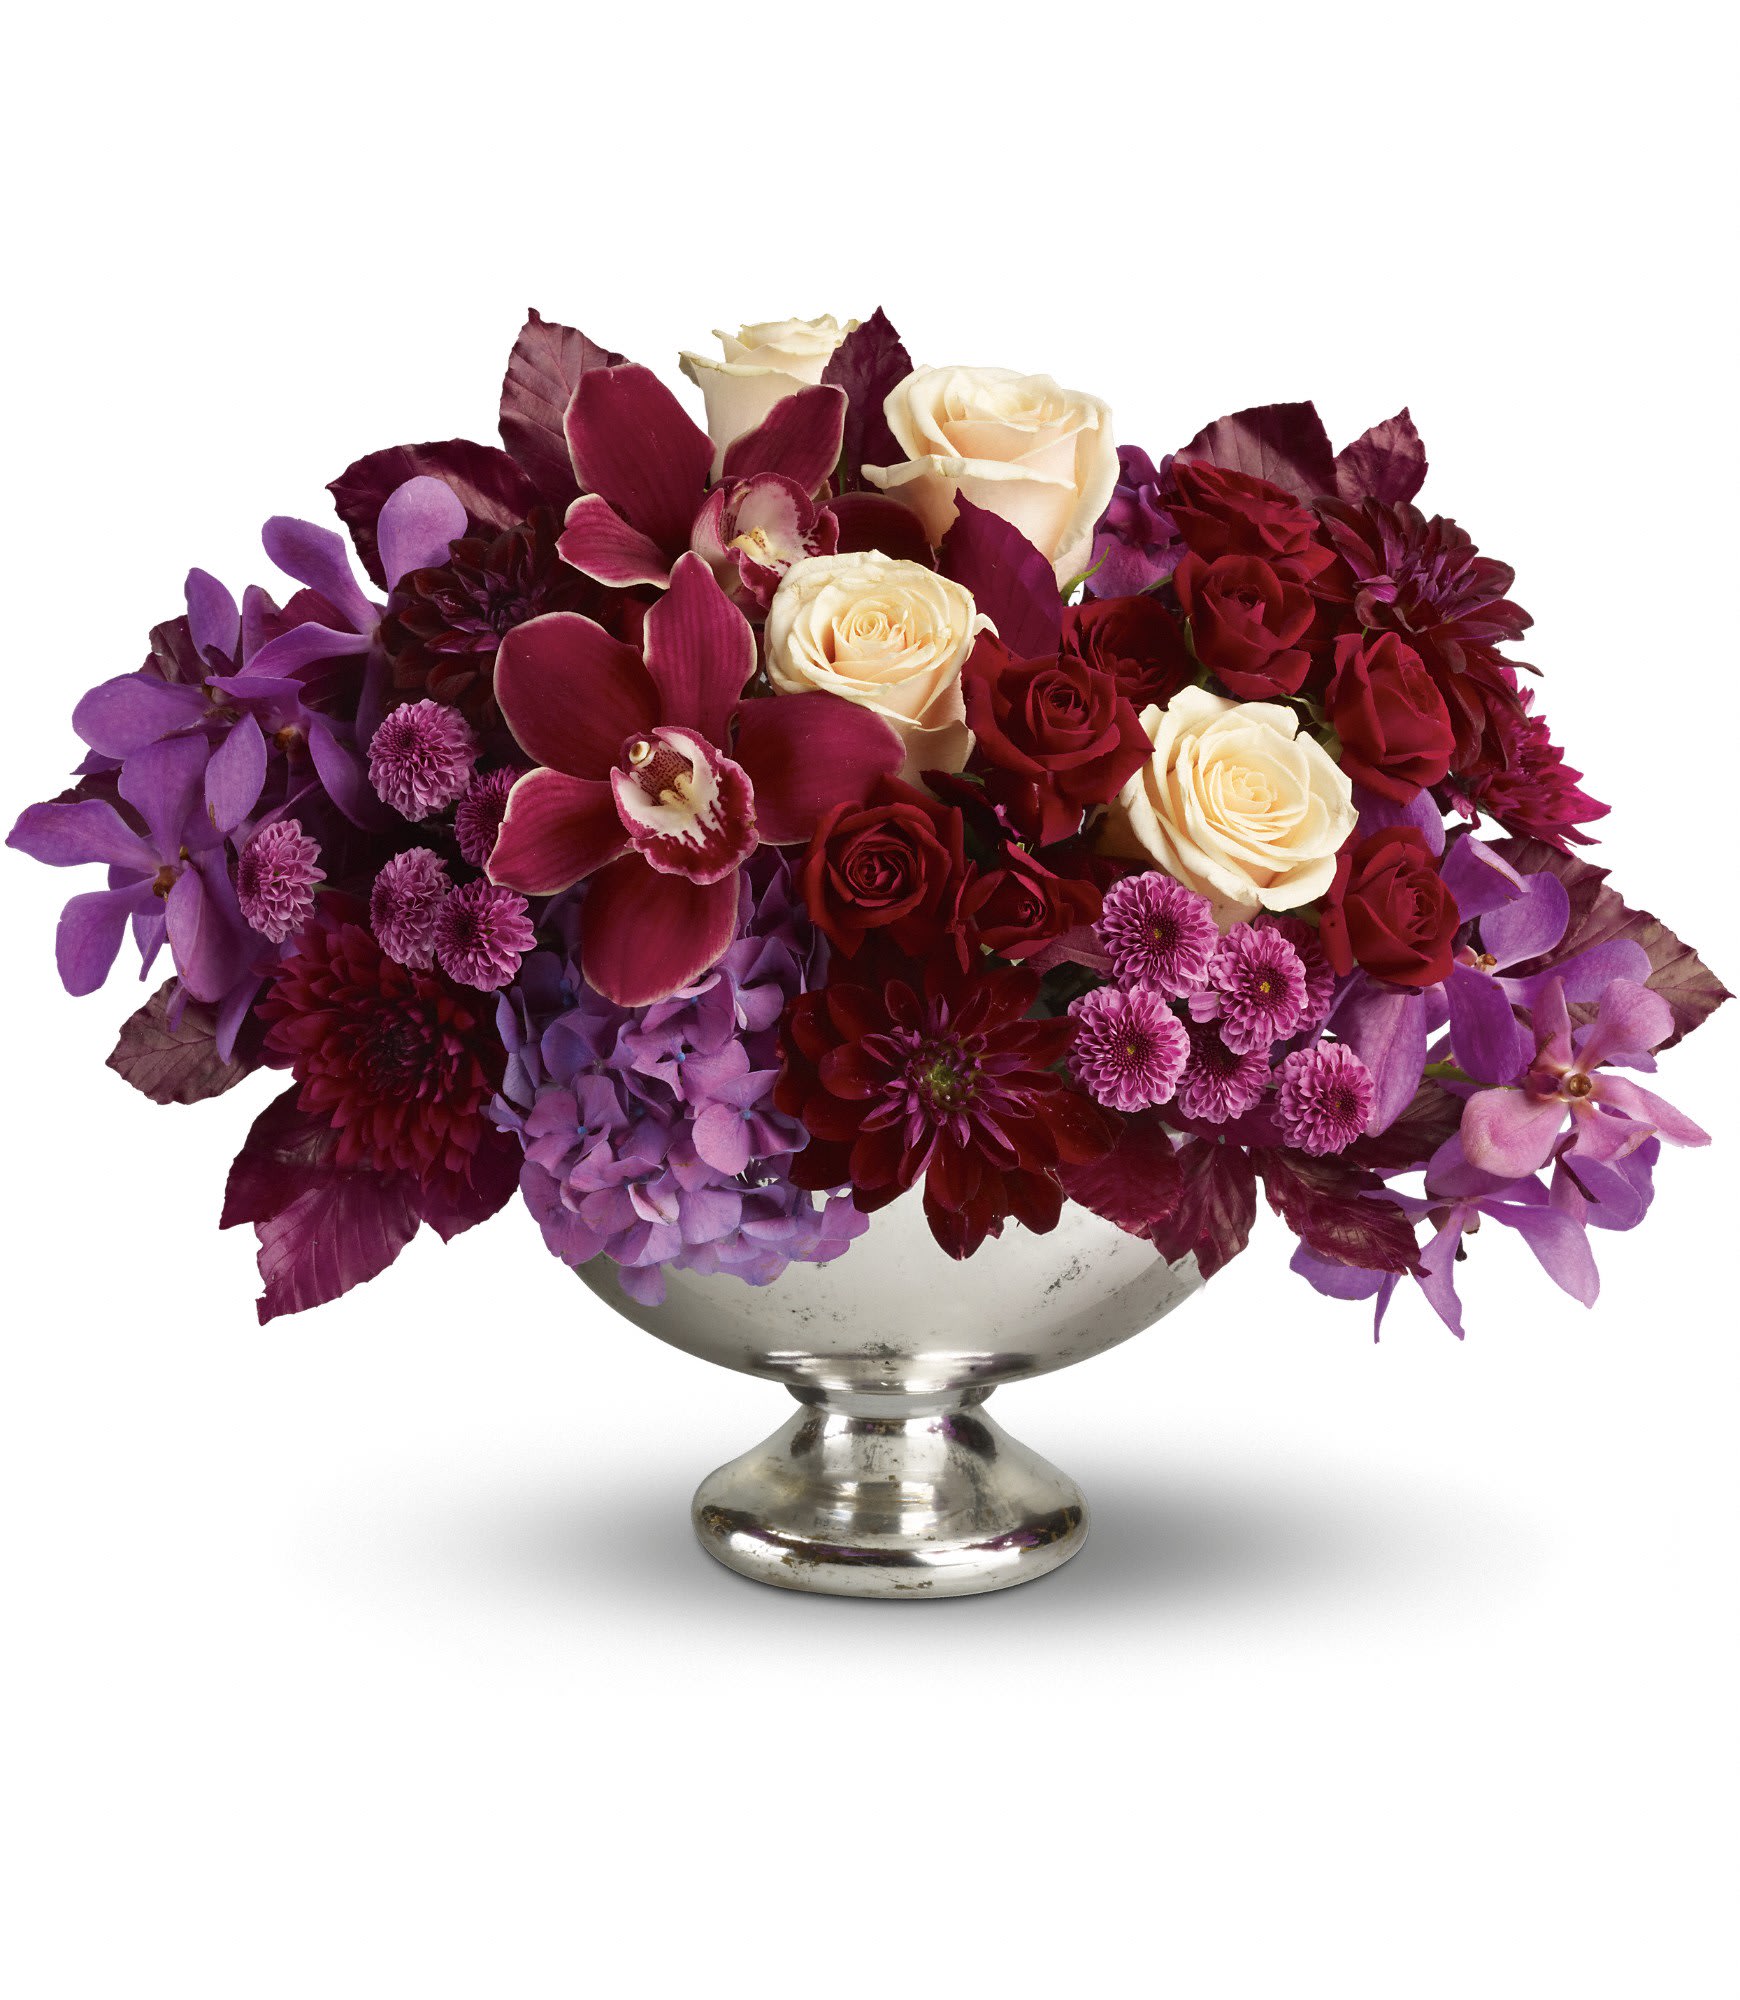 Teleflora's Lush and Lovely  - &quot;Lush and lovely&quot; might seem like a bit of an understatement when gazing at this incredible arrangement of luxurious flowers delivered in a divine Mercury Glass Bowl. Let's add &quot;beautiful and breathtaking&quot; to the description.    Spectacular red cymbidium orchids, purple mokara orchids, lavender hydrangea, crÃ¨me roses, dark red spray roses, burgundy dahlias, purple and lavender chrysanthemums and burgundy copper beech arrive in an exclusive Mercury Glass Bowl.    Approximately 18&quot; W x 12 1/2&quot; H    Orientation: All-Around        As Shown : T172-1A      Deluxe : T172-1B      Premium : T172-1C    